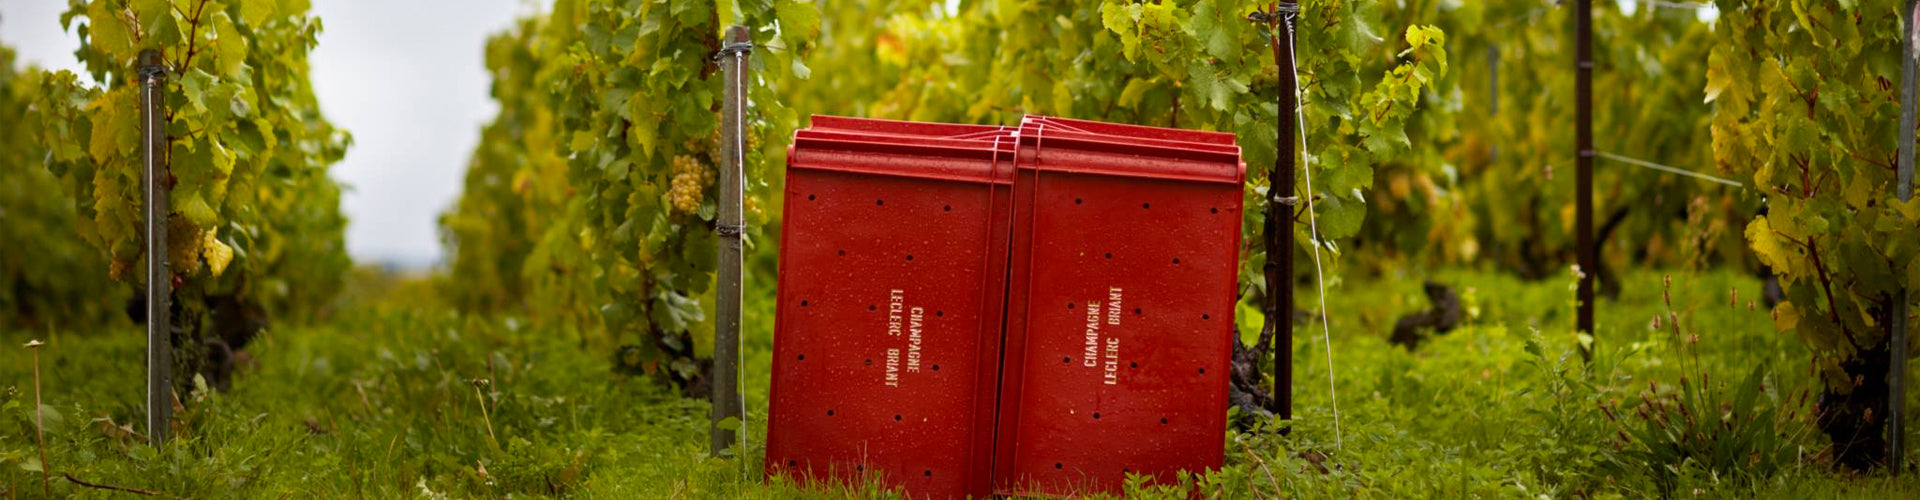 Grape picking boxes in Leclerc Briant Vineyards